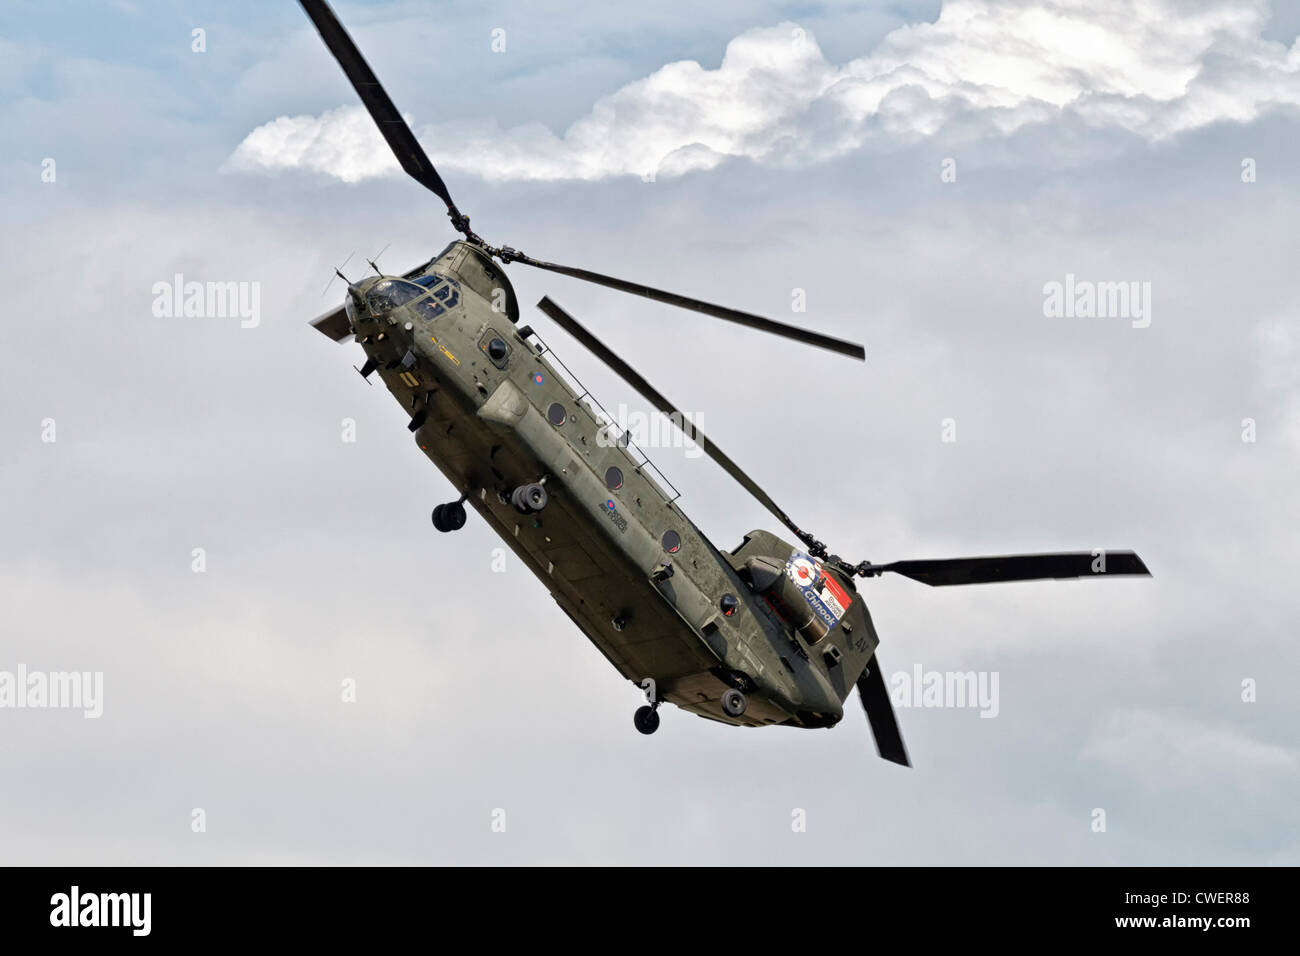 Boeing CH47 Chinook heavy lift helicopter Stock Photo